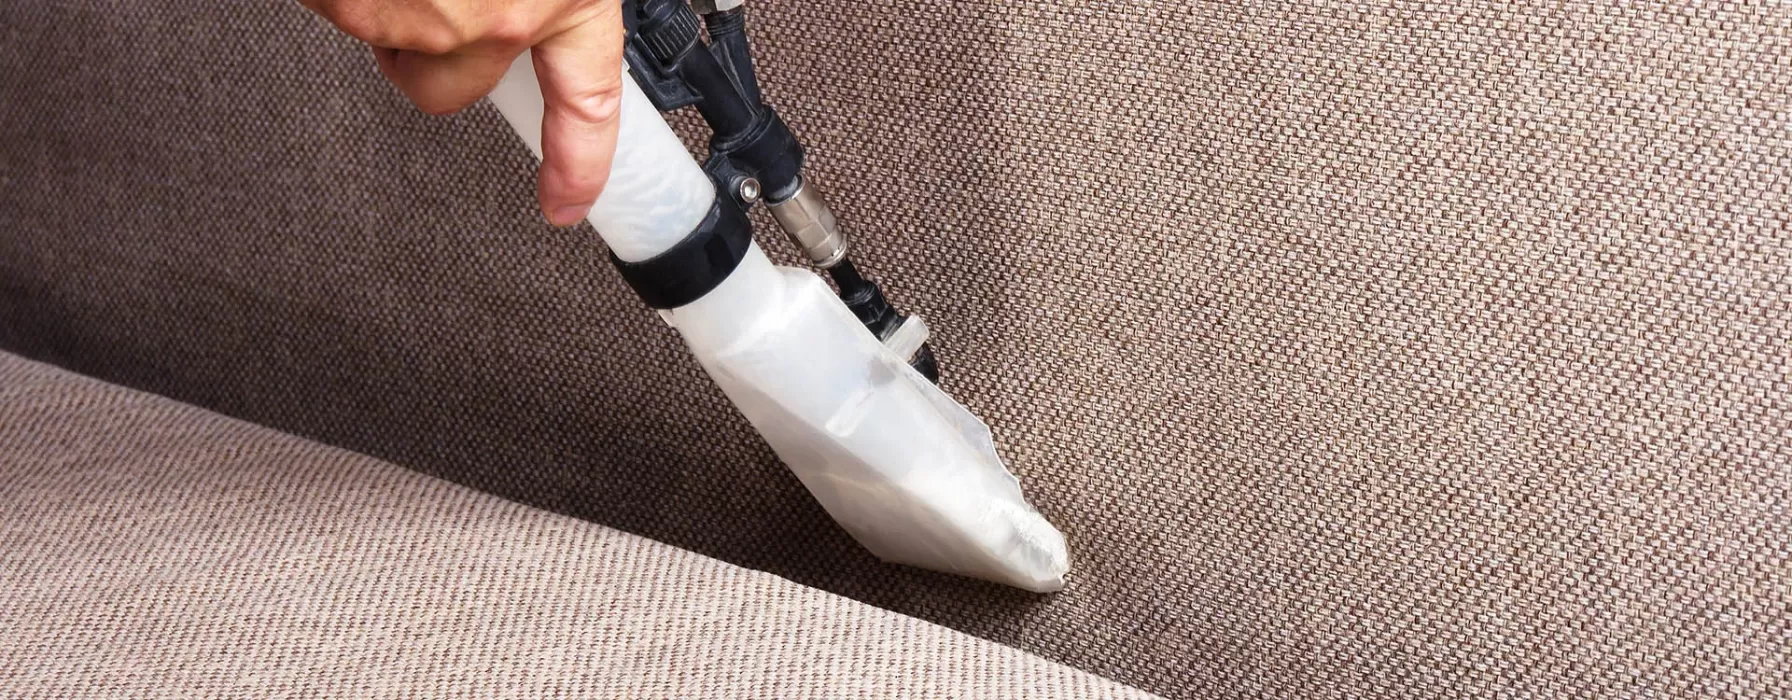 Carpet Cleaning Cost West Palm Beach